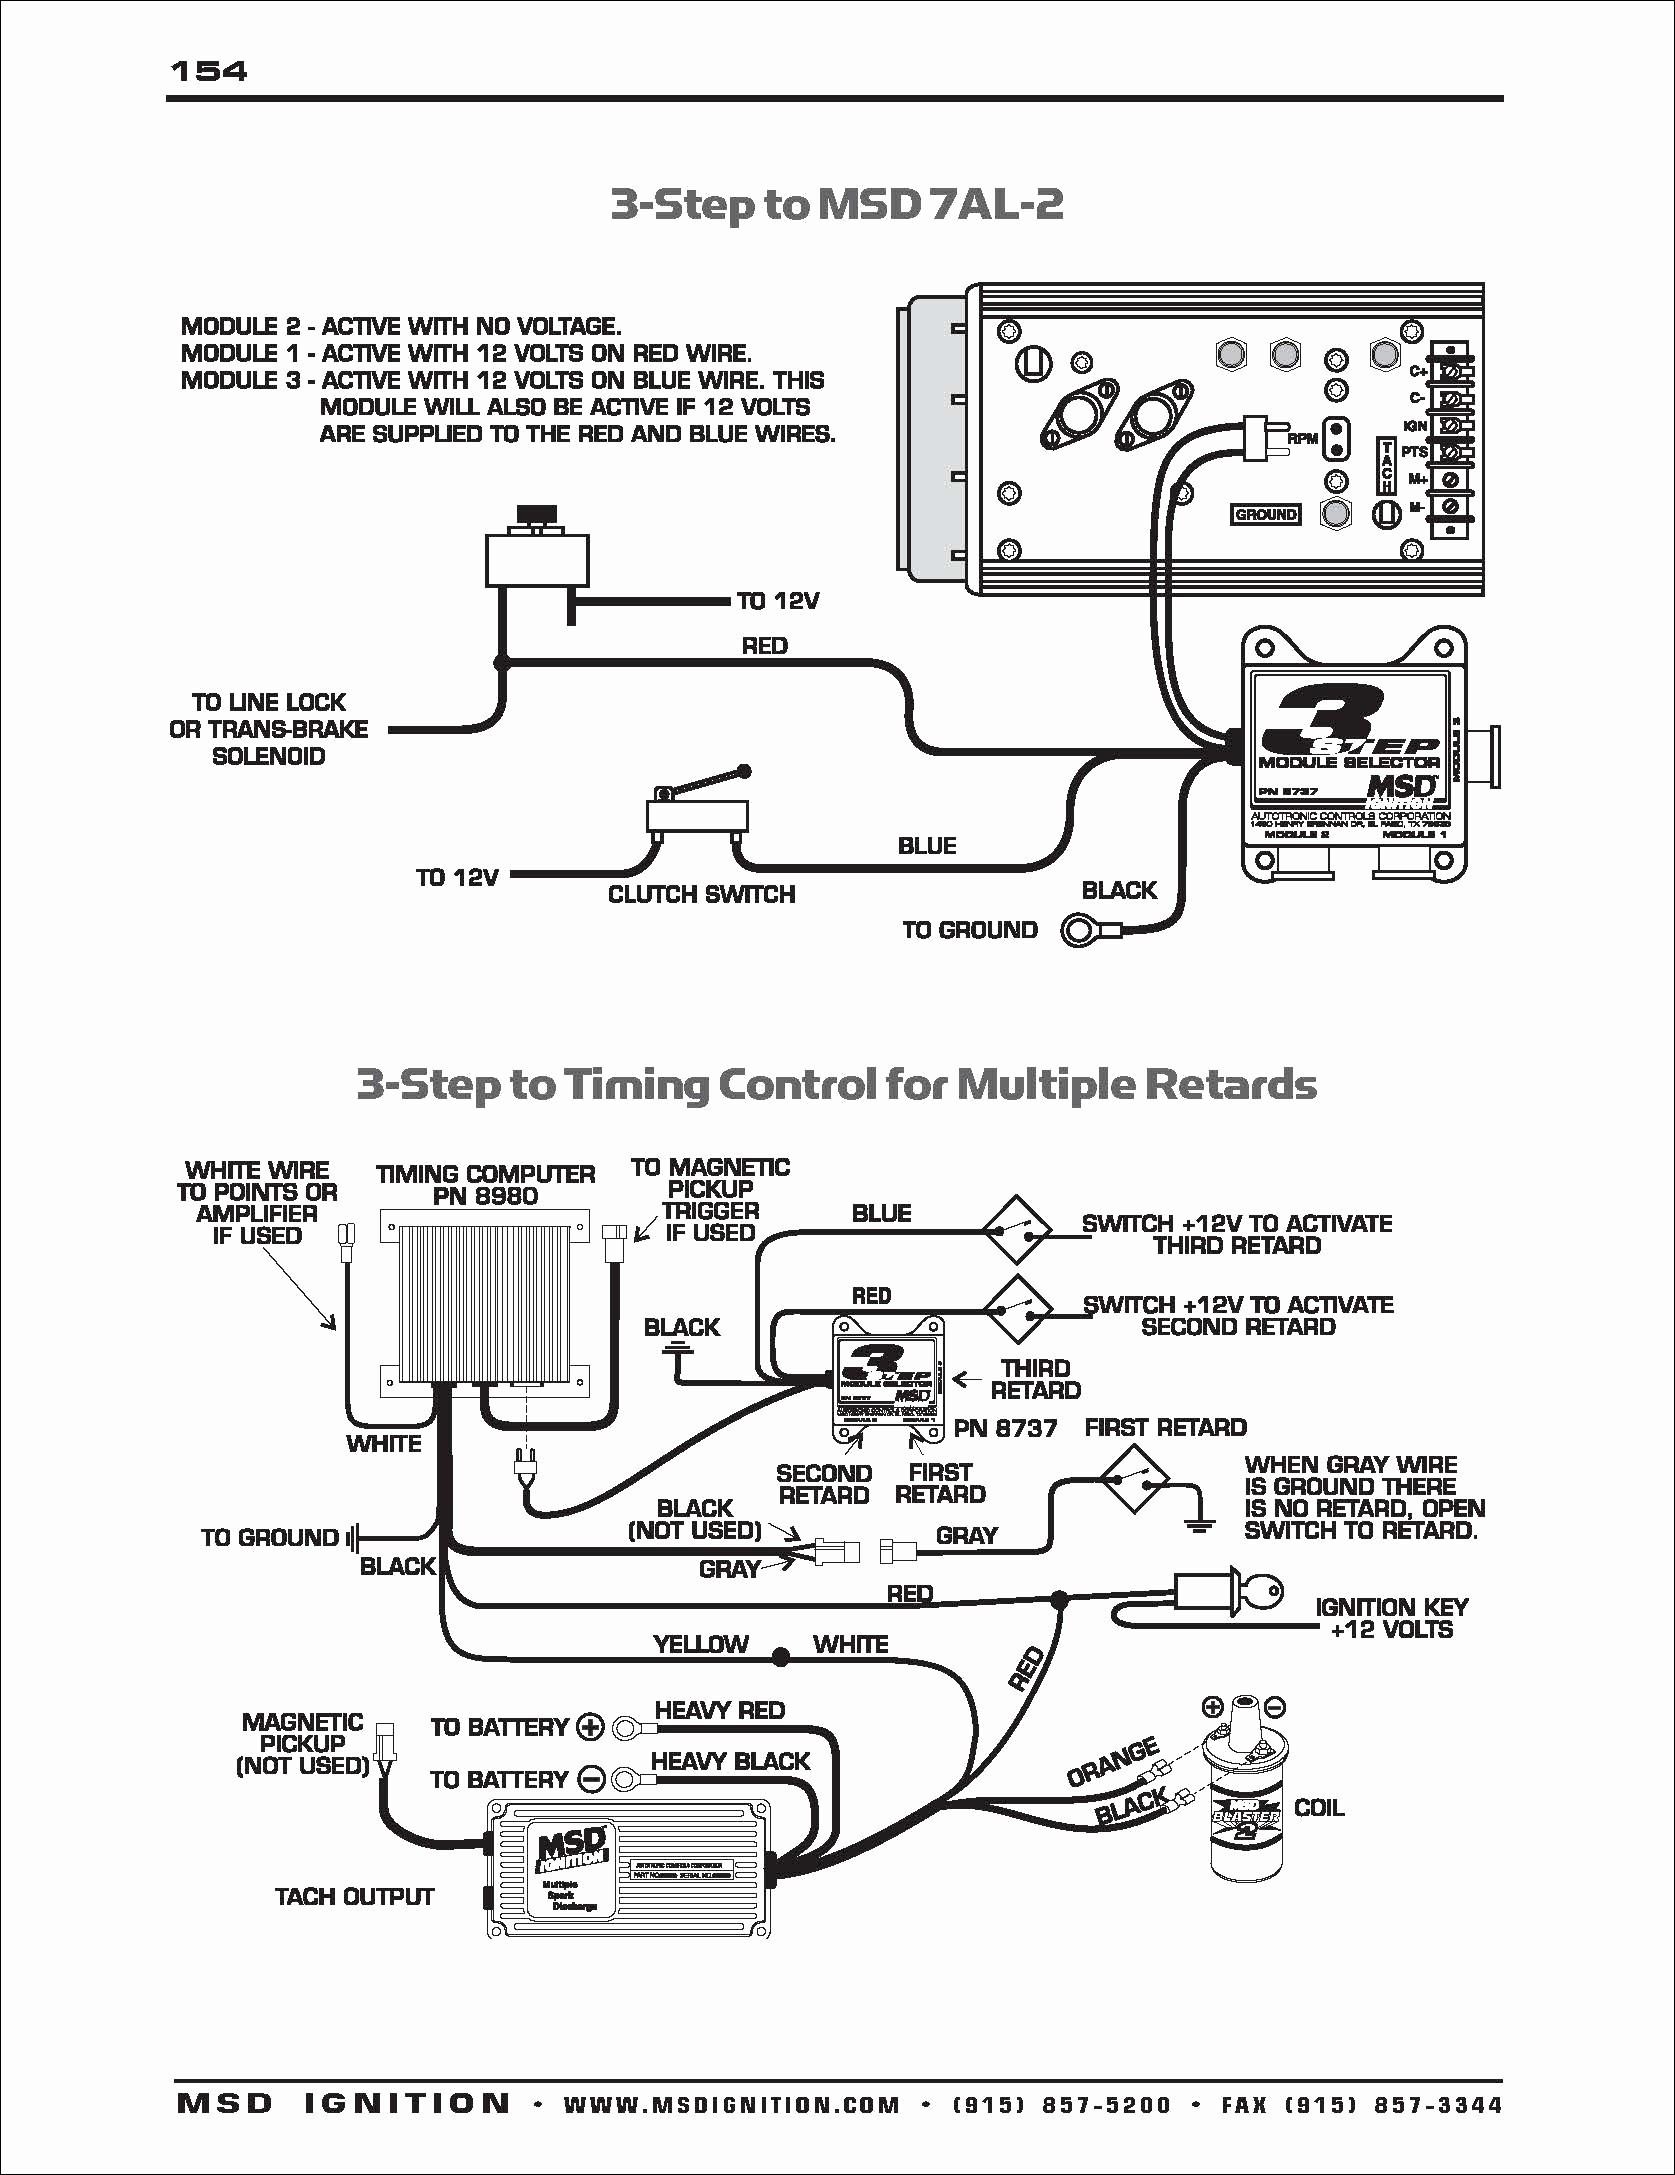 Coil Ignition System Diagram Ignition System Troubleshooting Wiring Diagram Fresh S10 Ignition Of Coil Ignition System Diagram